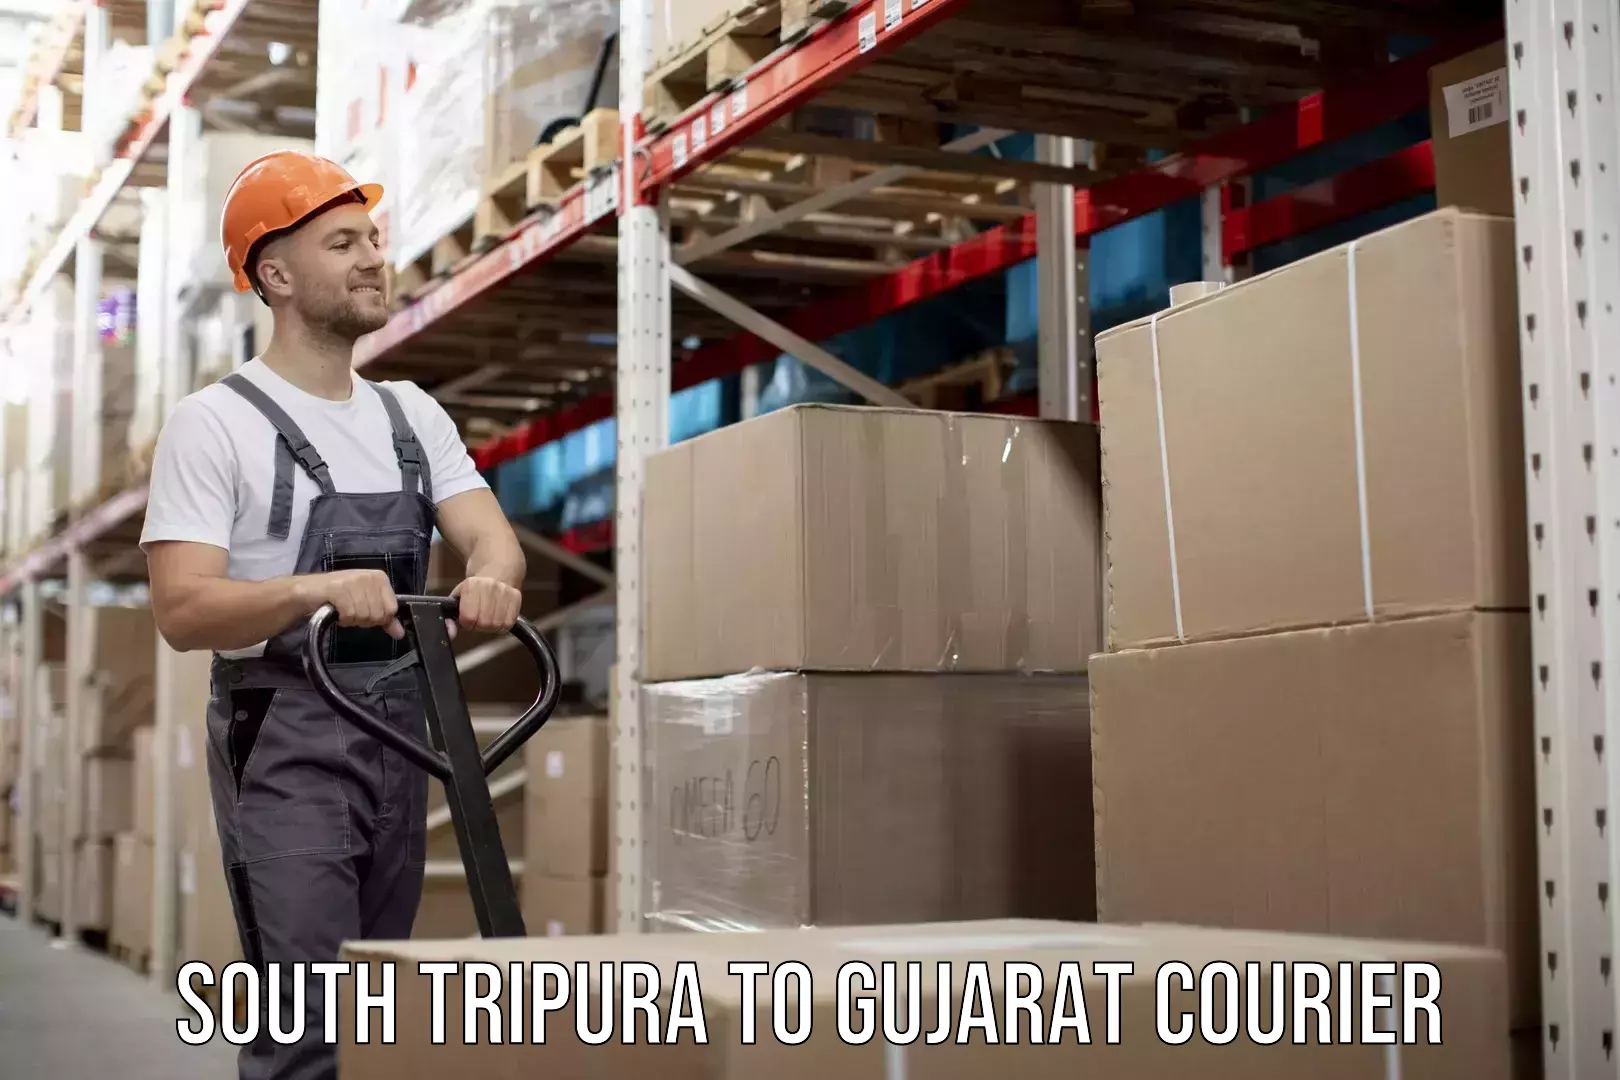 User-friendly delivery service South Tripura to Gujarat